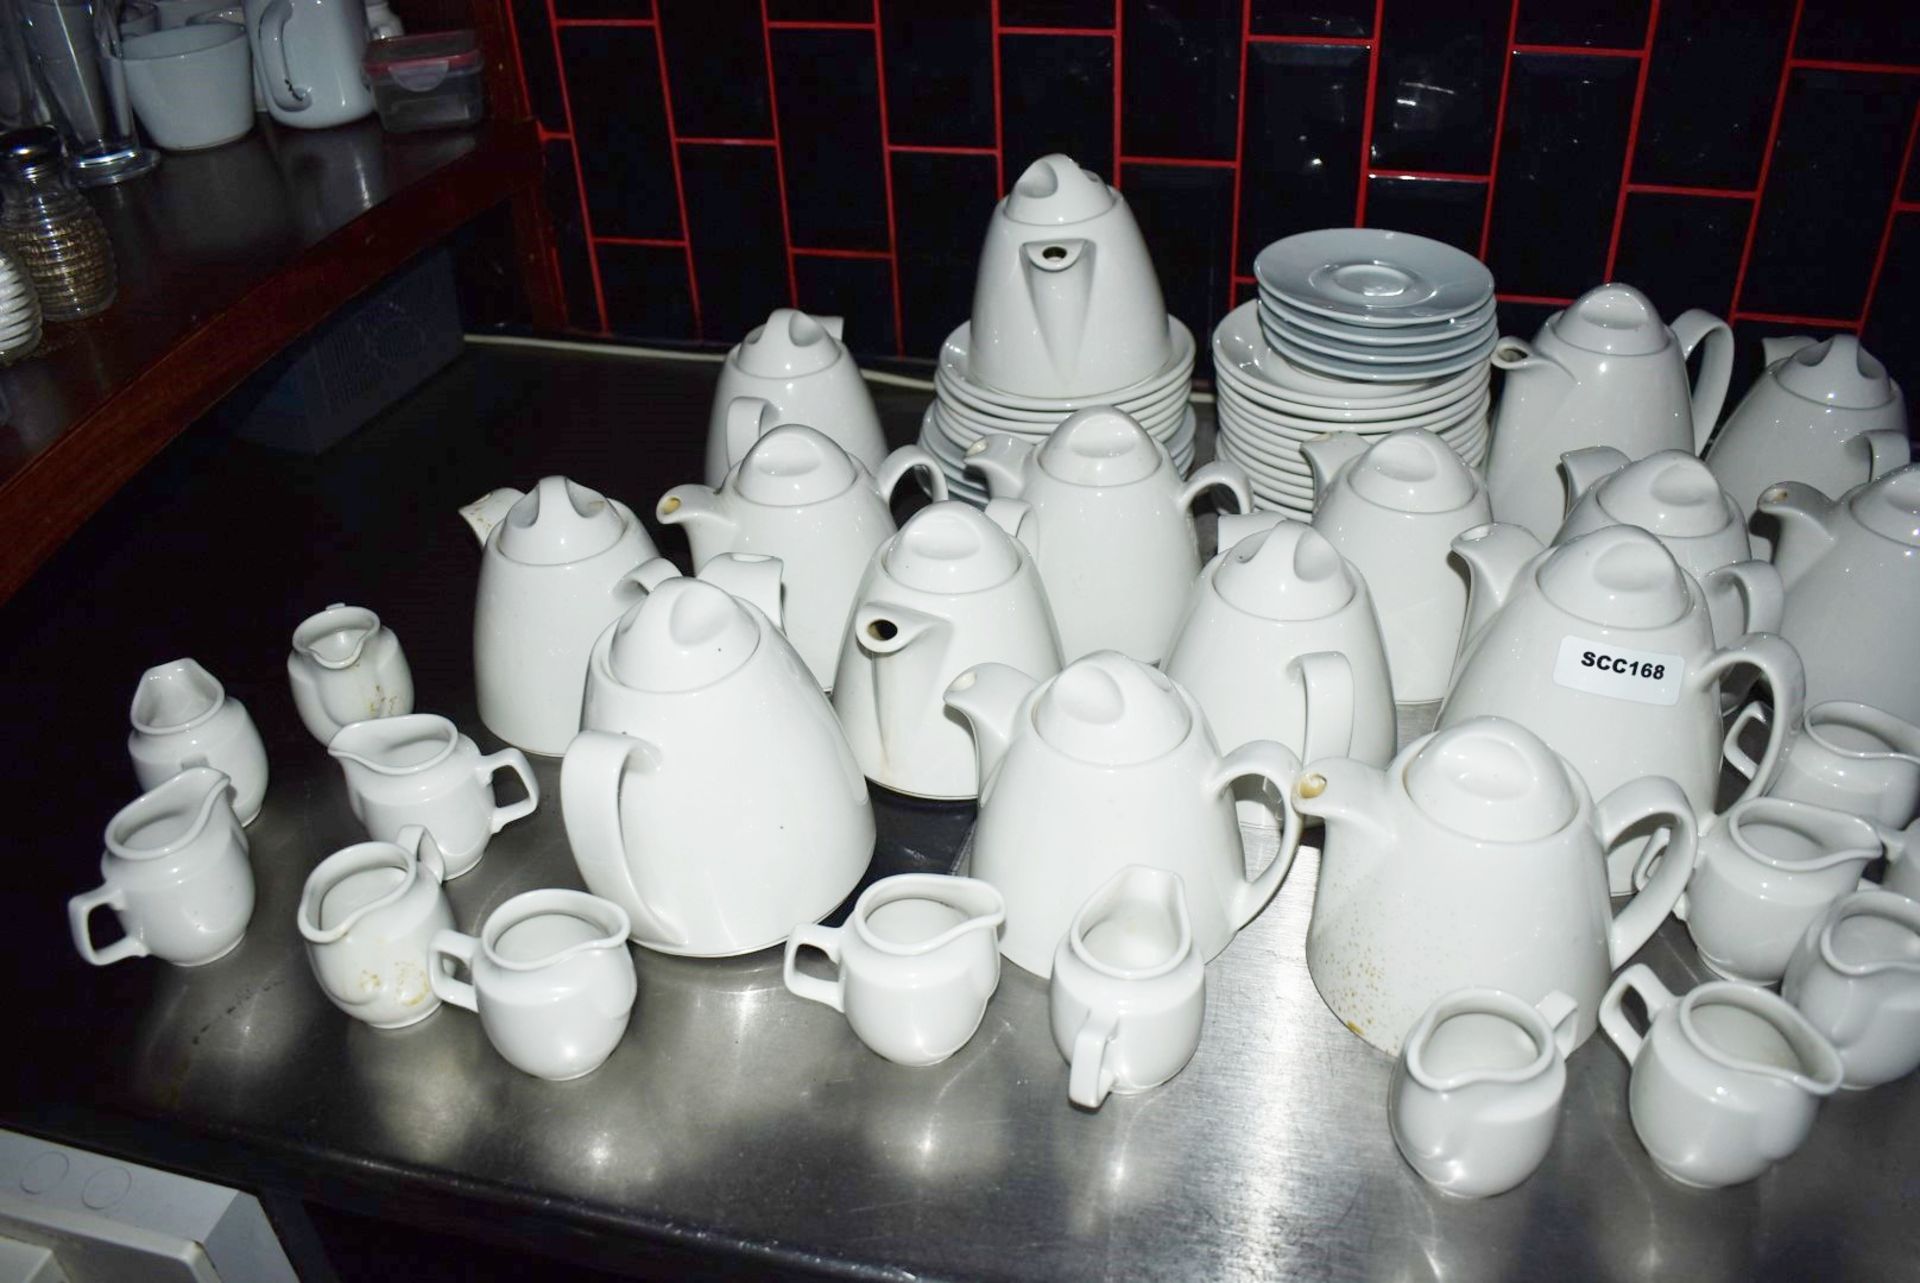 Assorted Collection Ceramic Coffee/Teaware to Include 80 Items - Teapots, Milk Jugs, Saucers & More - Image 3 of 10